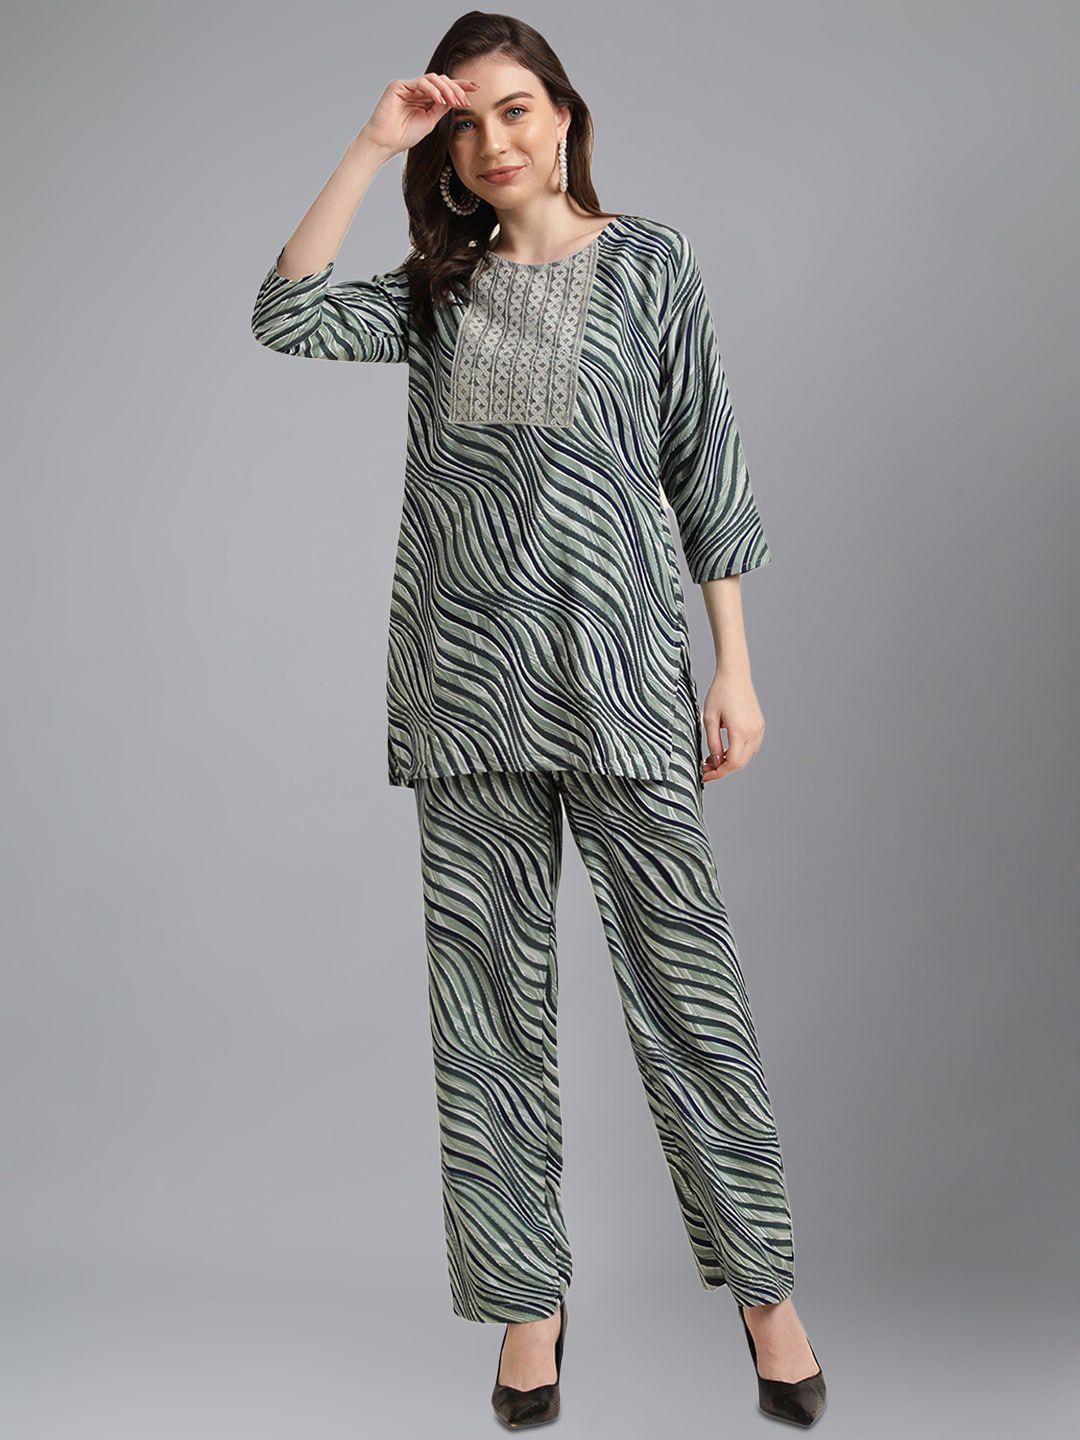 kalini printed embroidered top with trousers